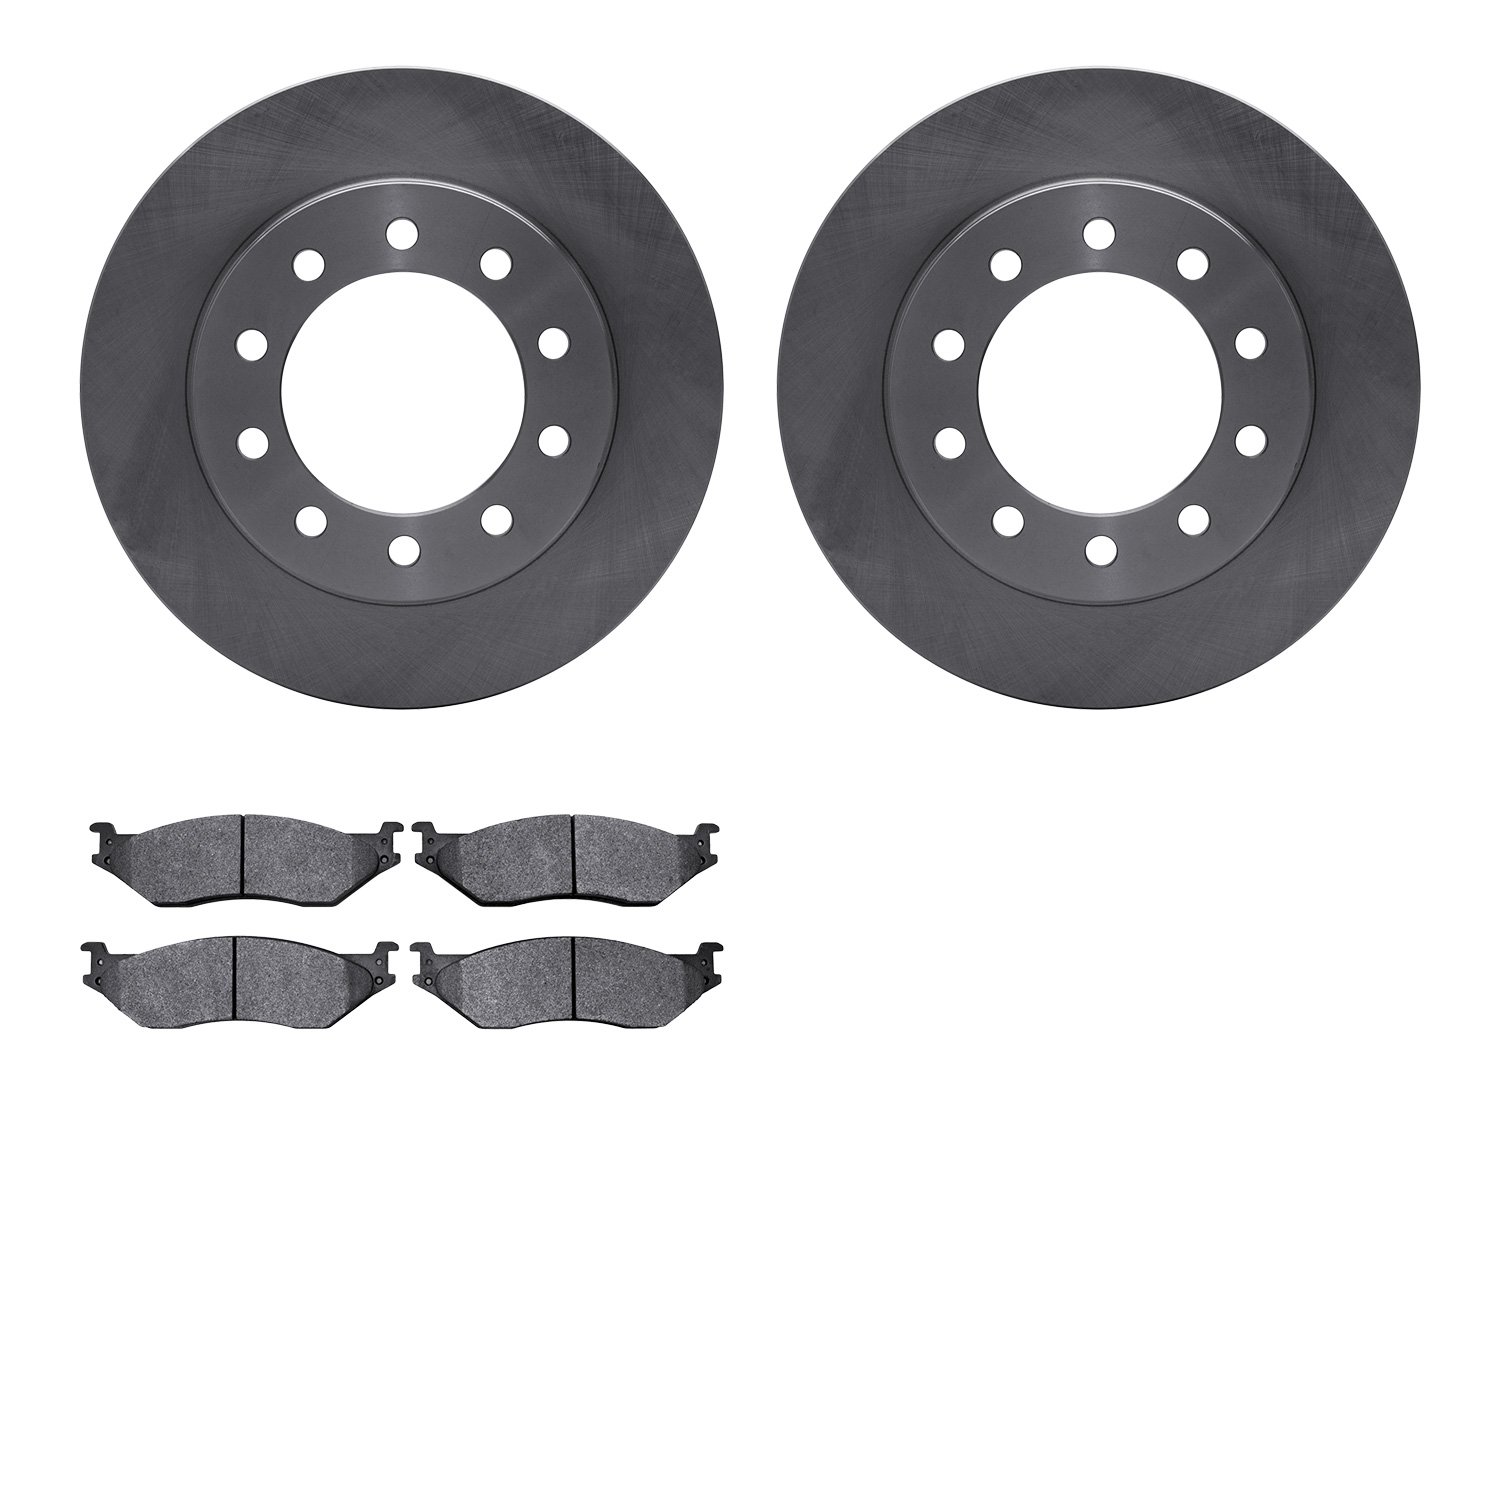 6402-54233 Brake Rotors with Ultimate-Duty Brake Pads, 2005-2016 Ford/Lincoln/Mercury/Mazda, Position: Front